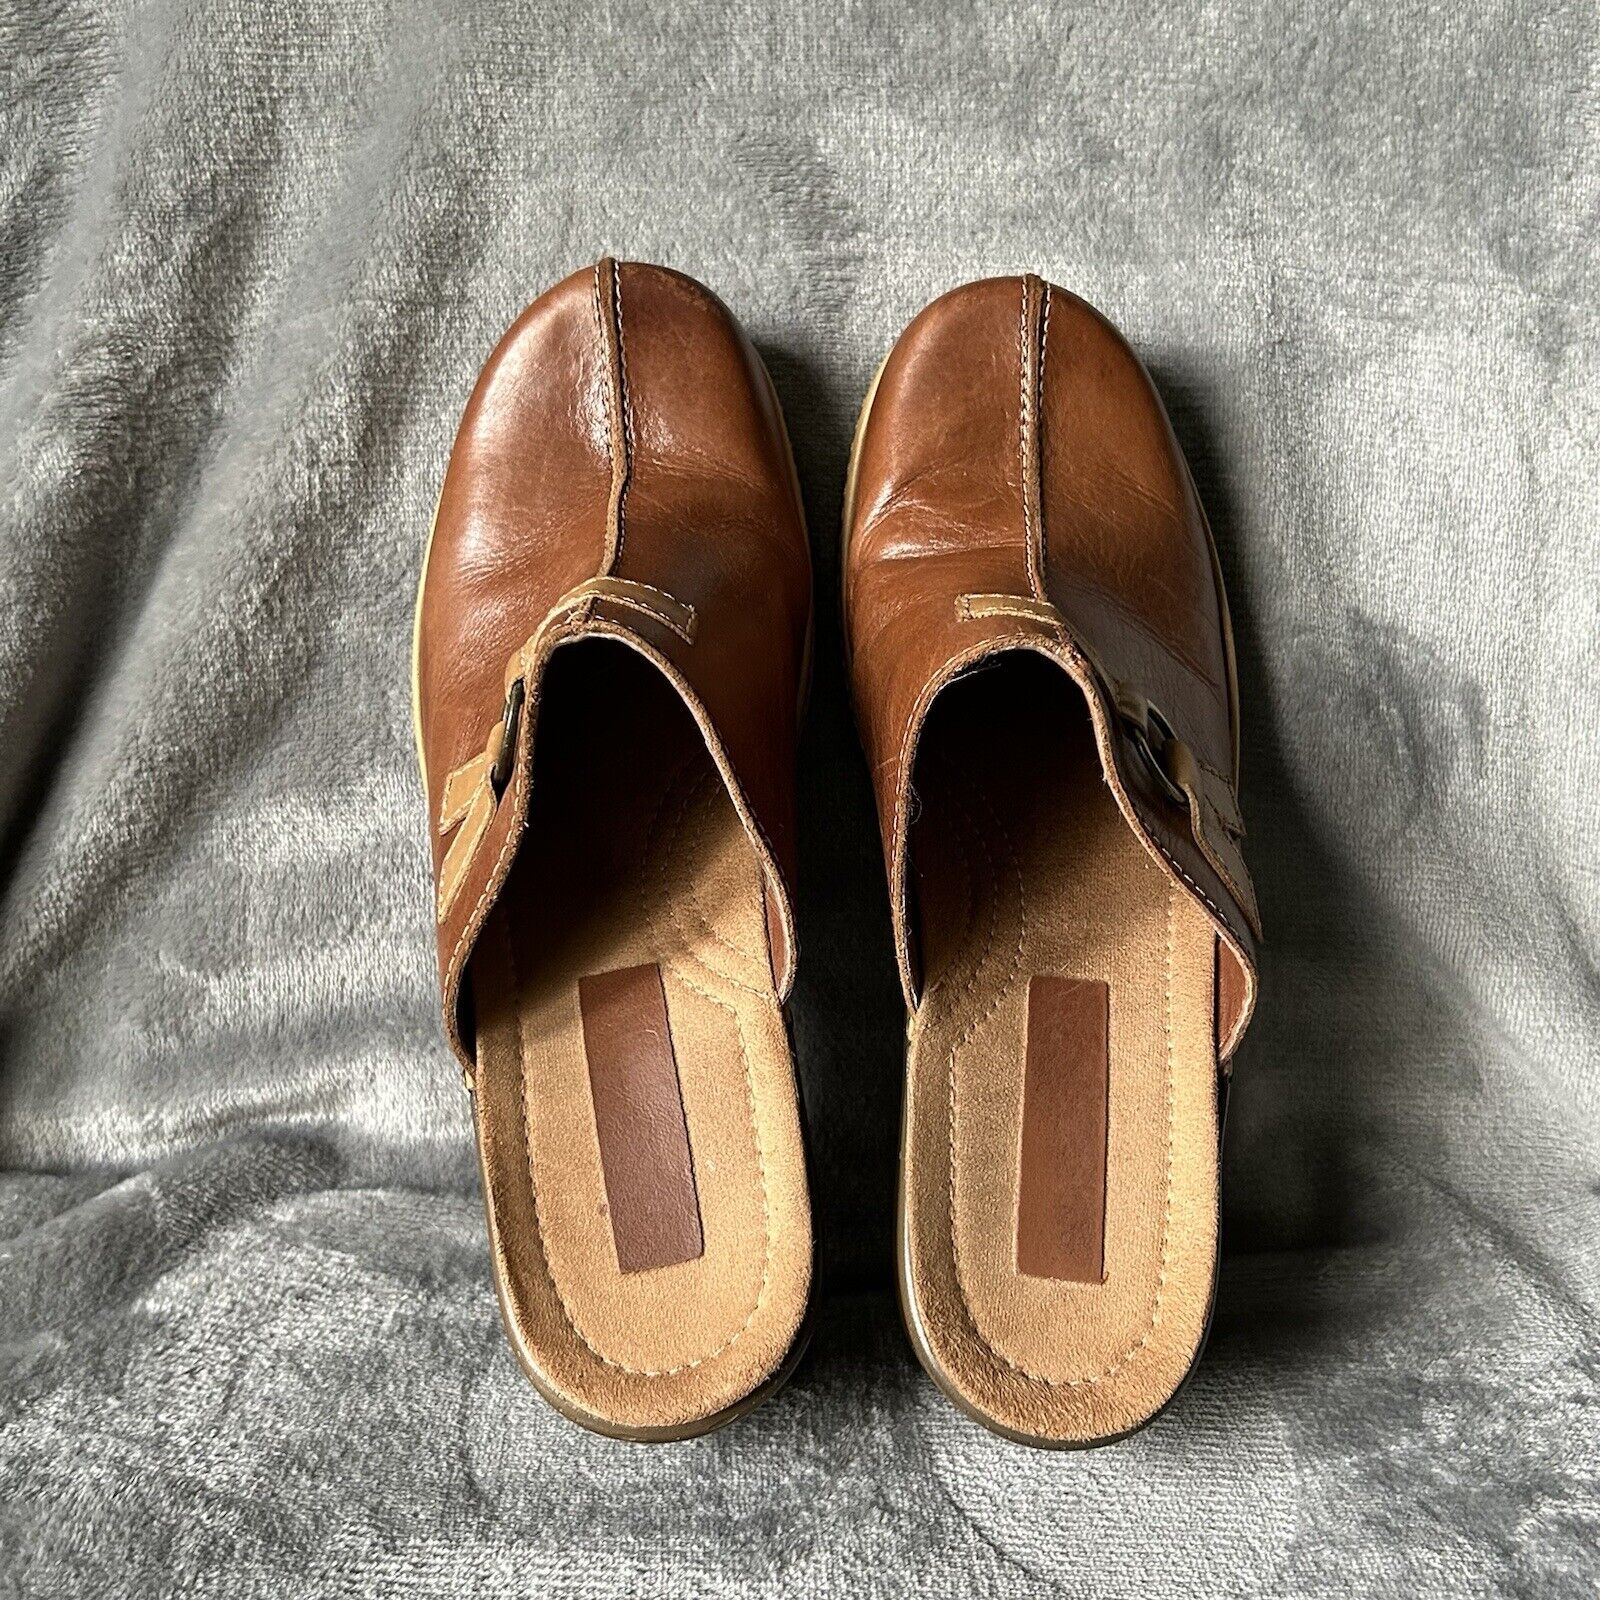 Clogs Womens Size 9 Slip On Brown Heeled Shoes - image 7